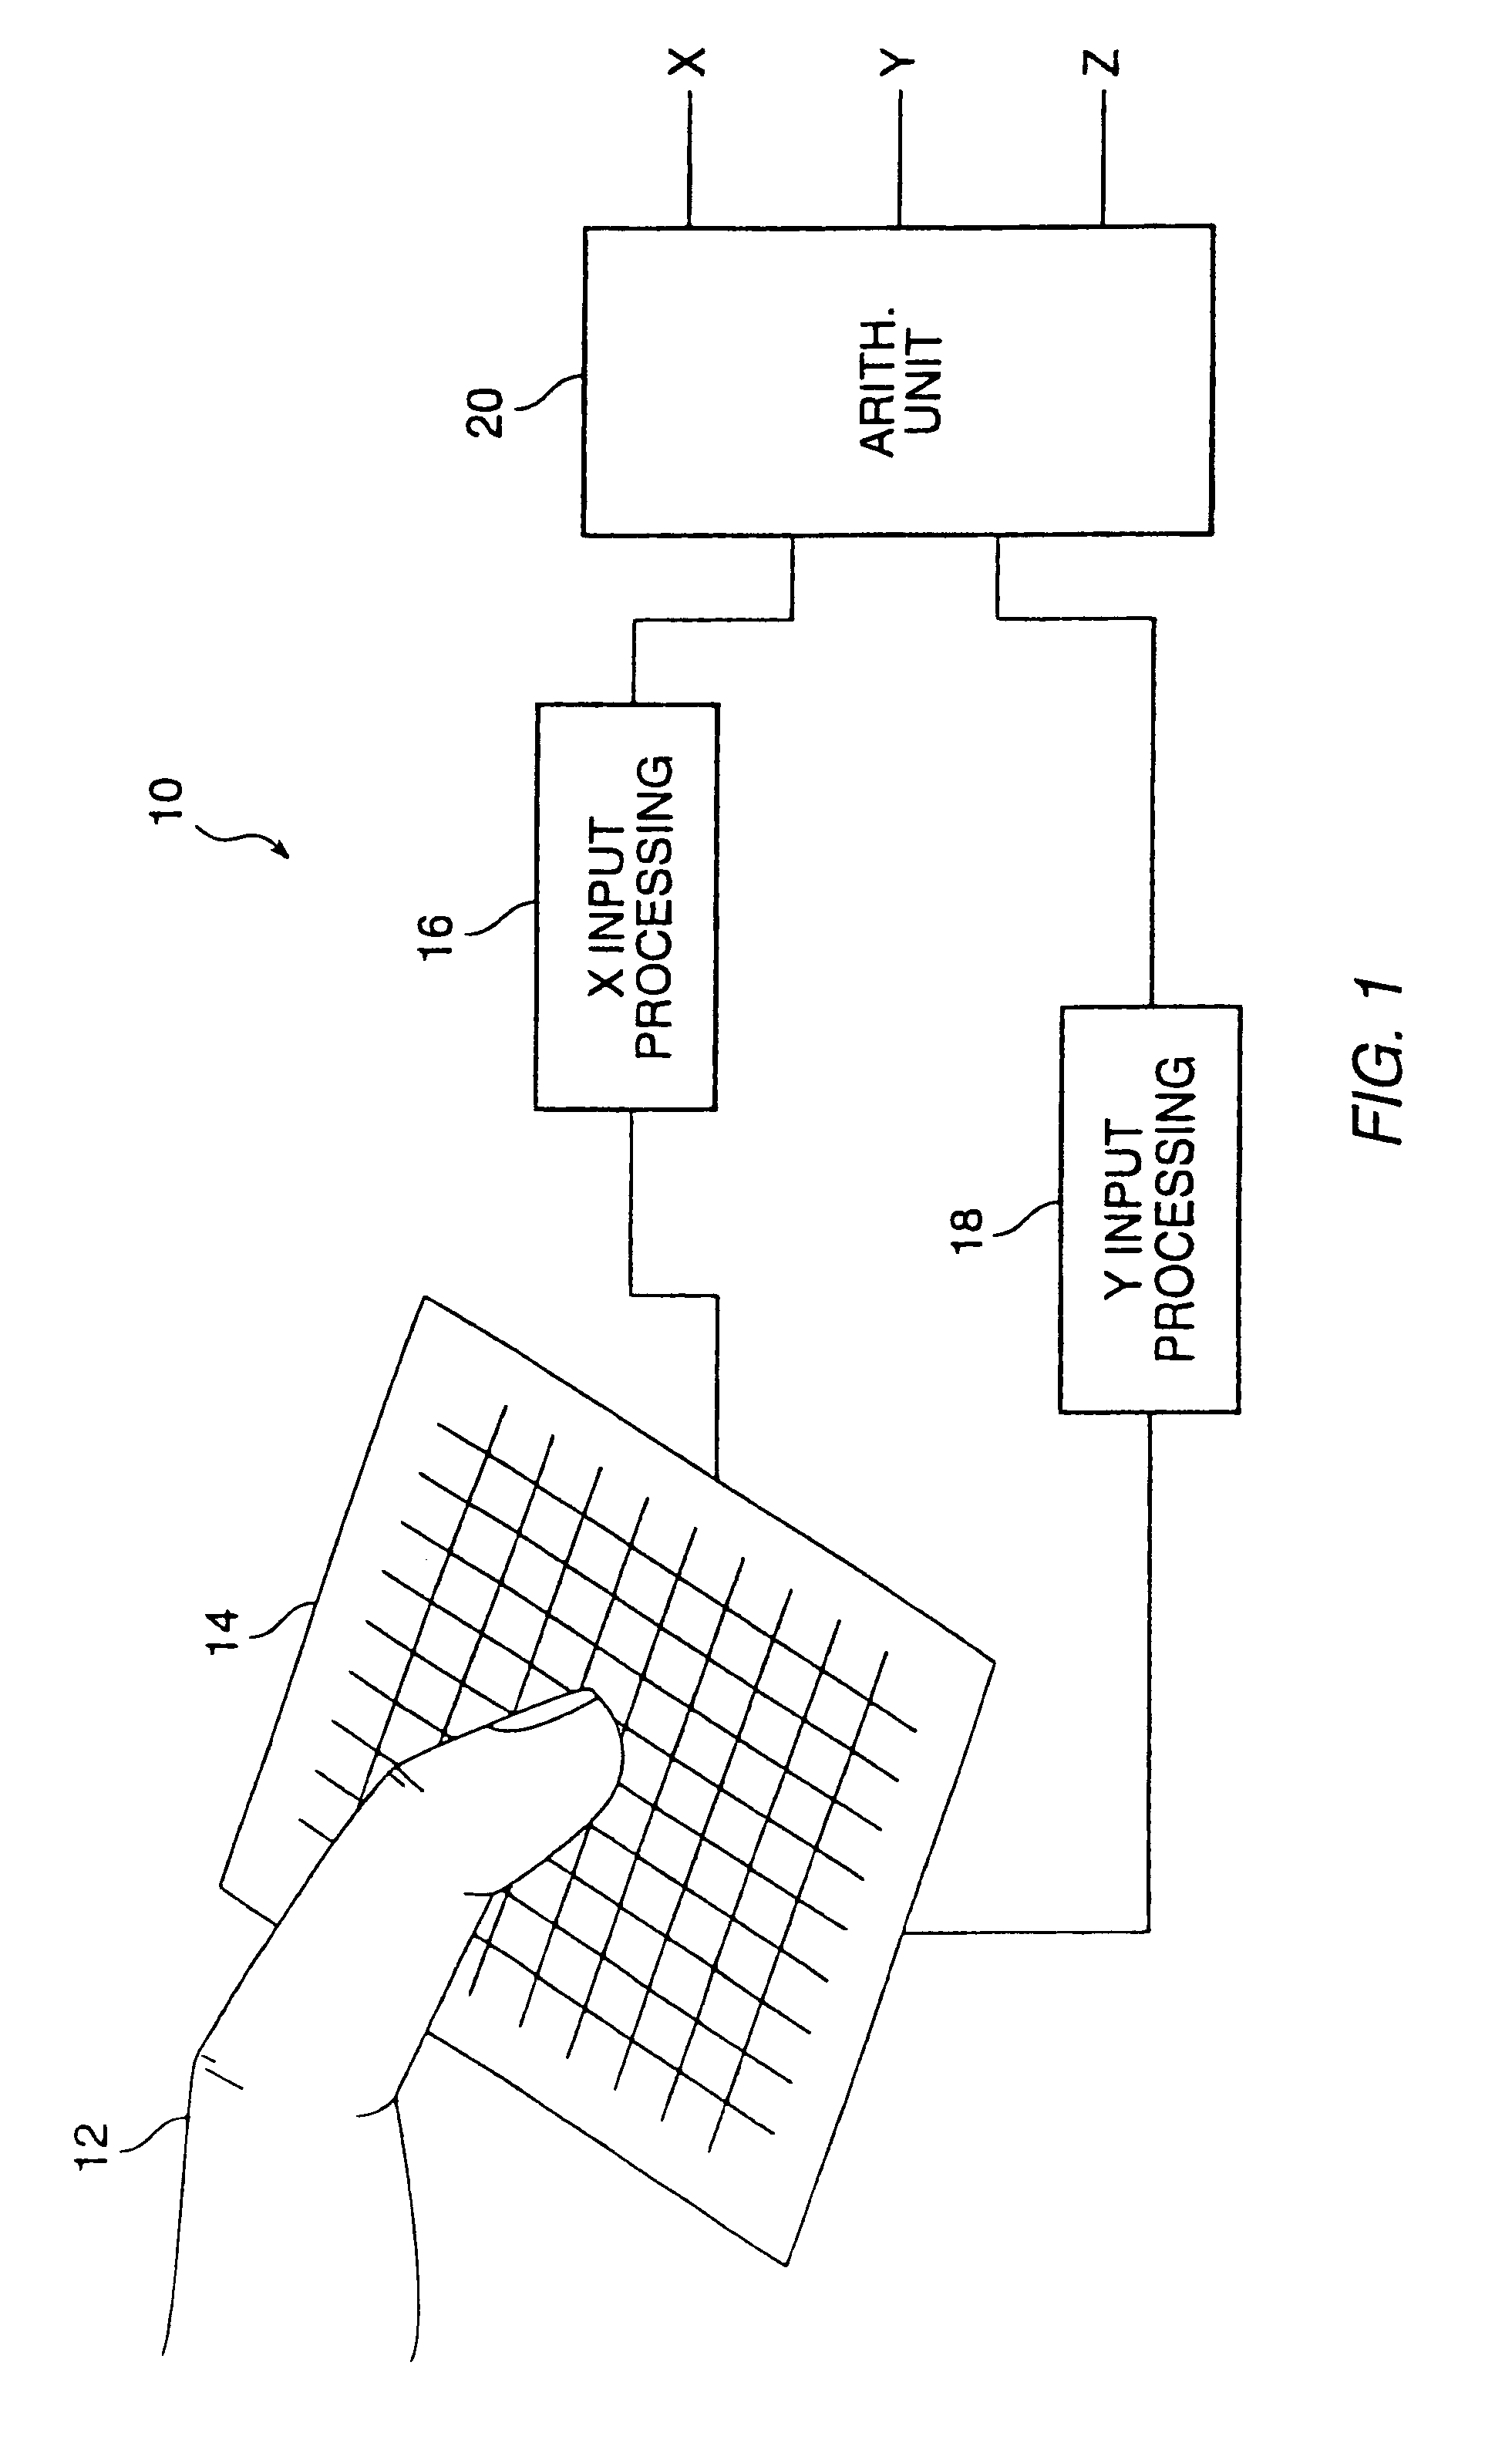 Object position detection system and method